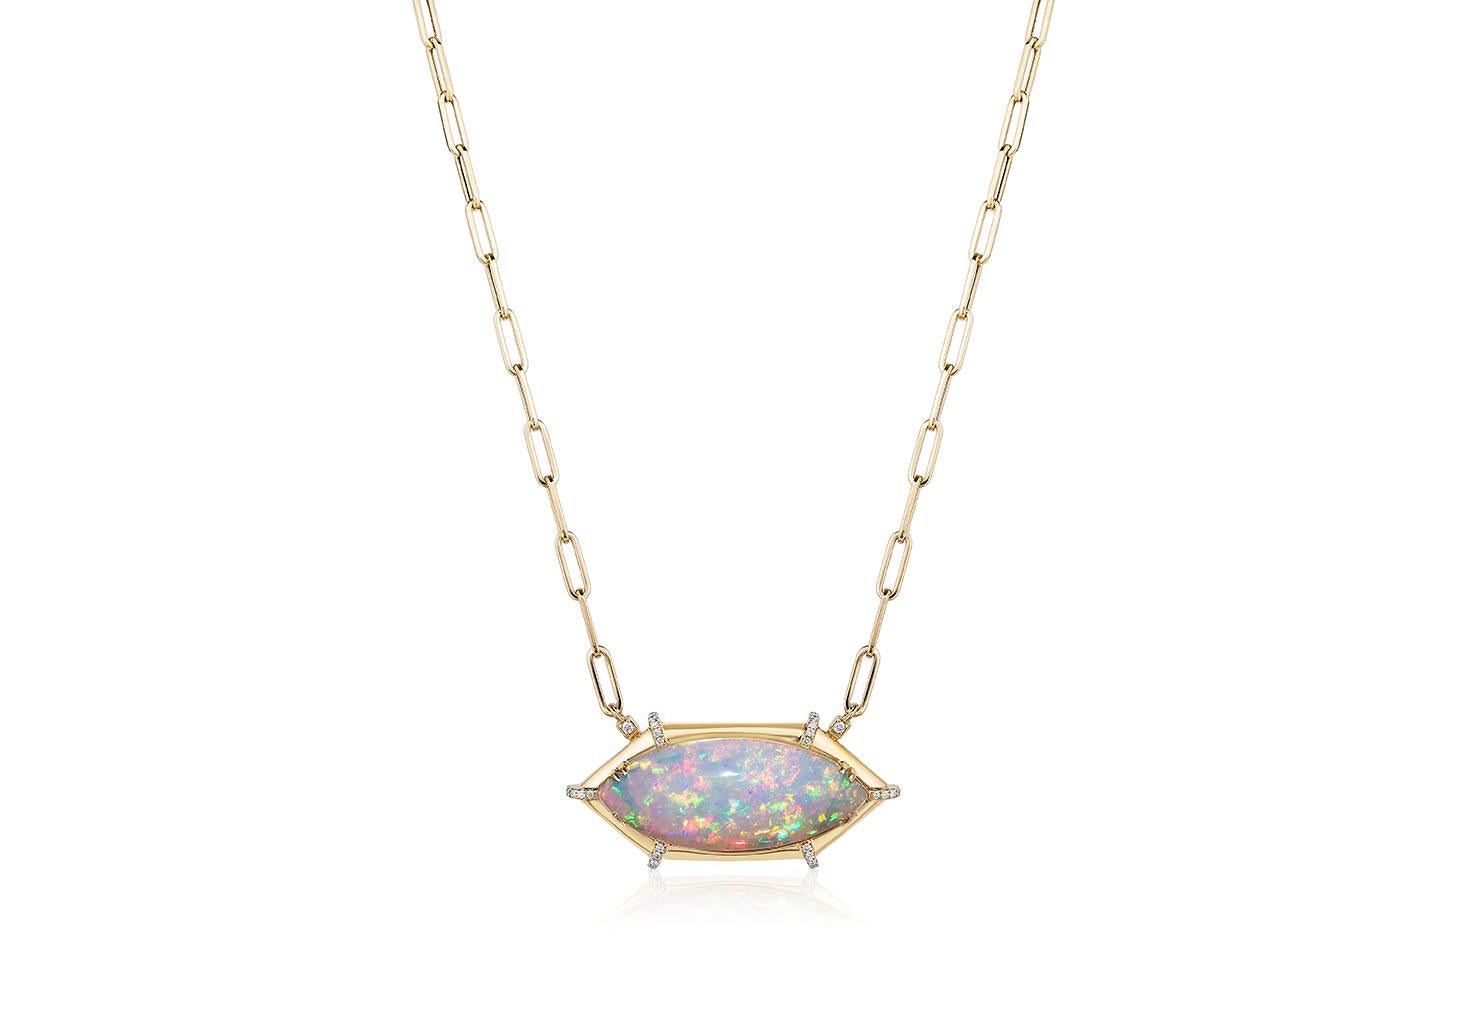 Marquise Shape Opal Cabochon Pendant in 18K Yellow Gold, from 'G-One' Collection. Our G-One Collection undeniably carries the most special pieces of Goshwara. The sought-after, one-of-a-kind pieces speak to each unique personality of the person